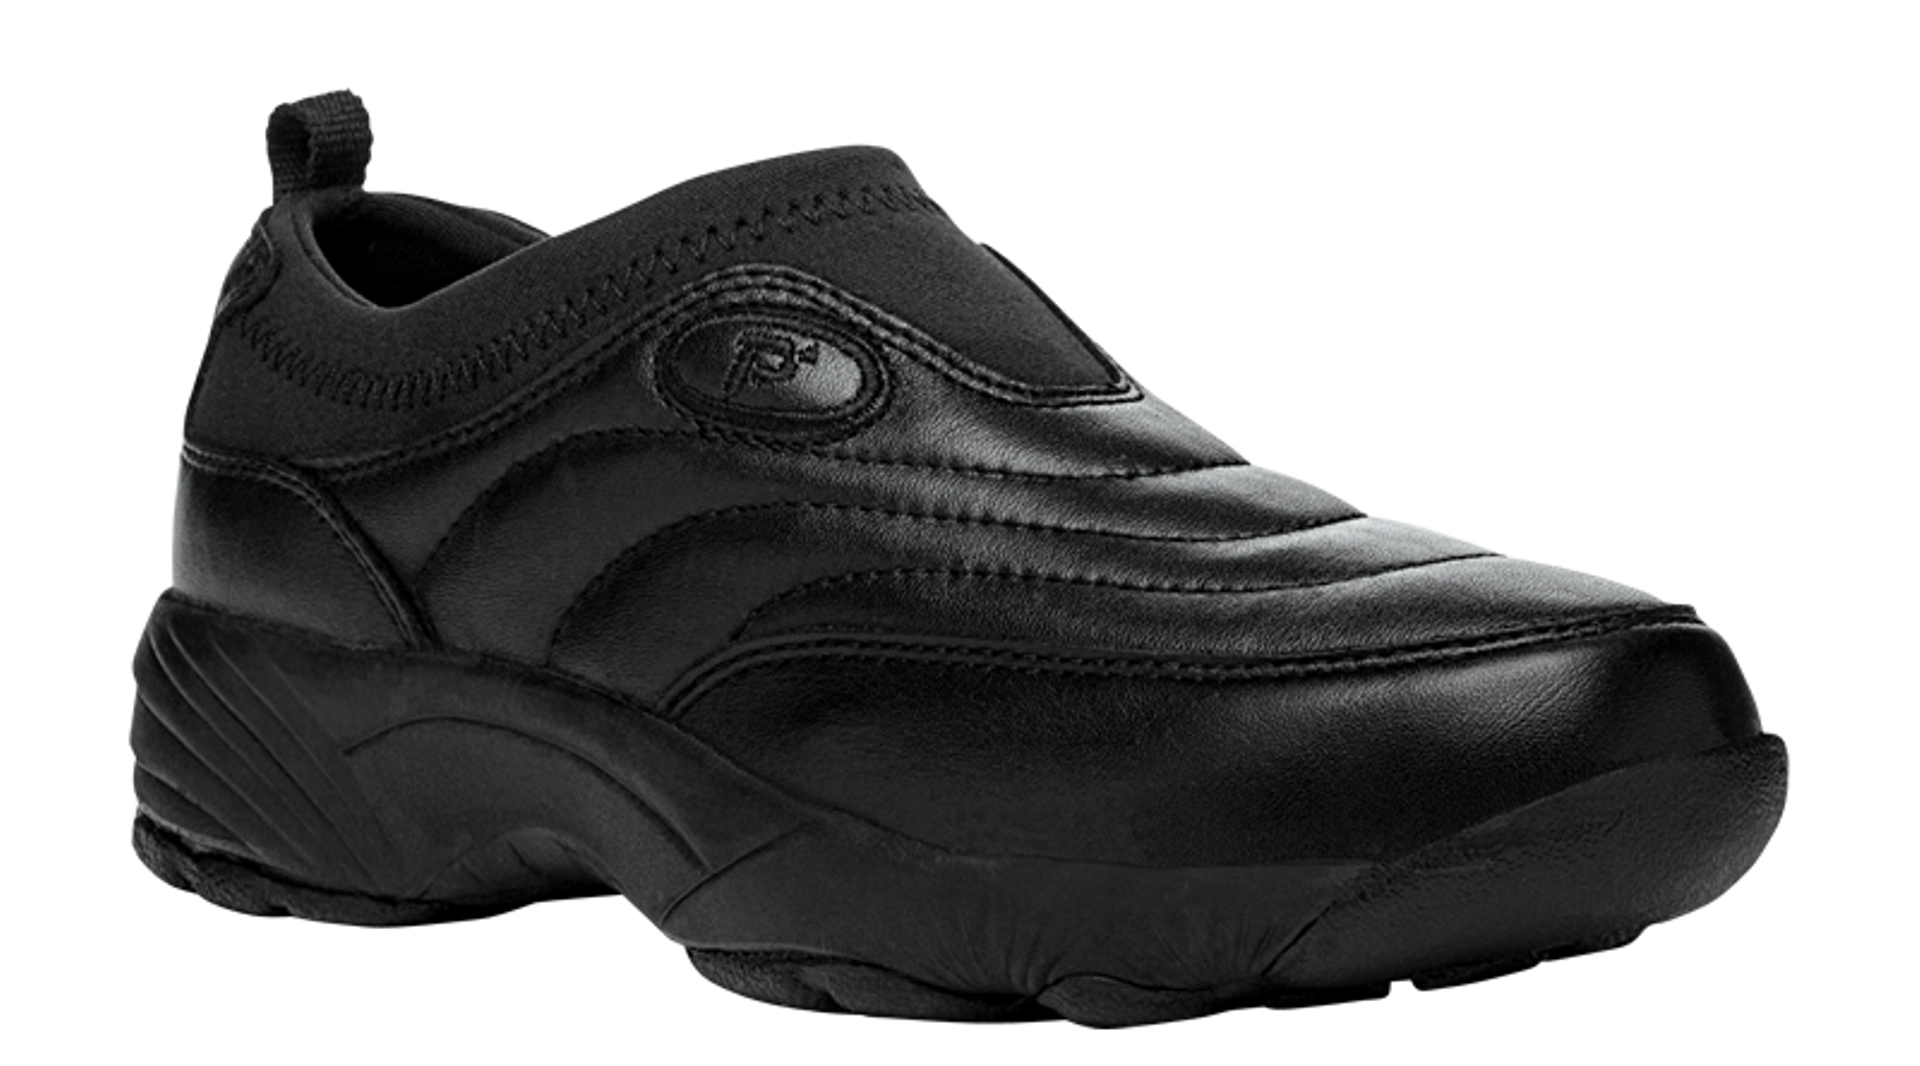 Propet Women's Wash and Wear Slip On Black Shoe - Wide Widths Available